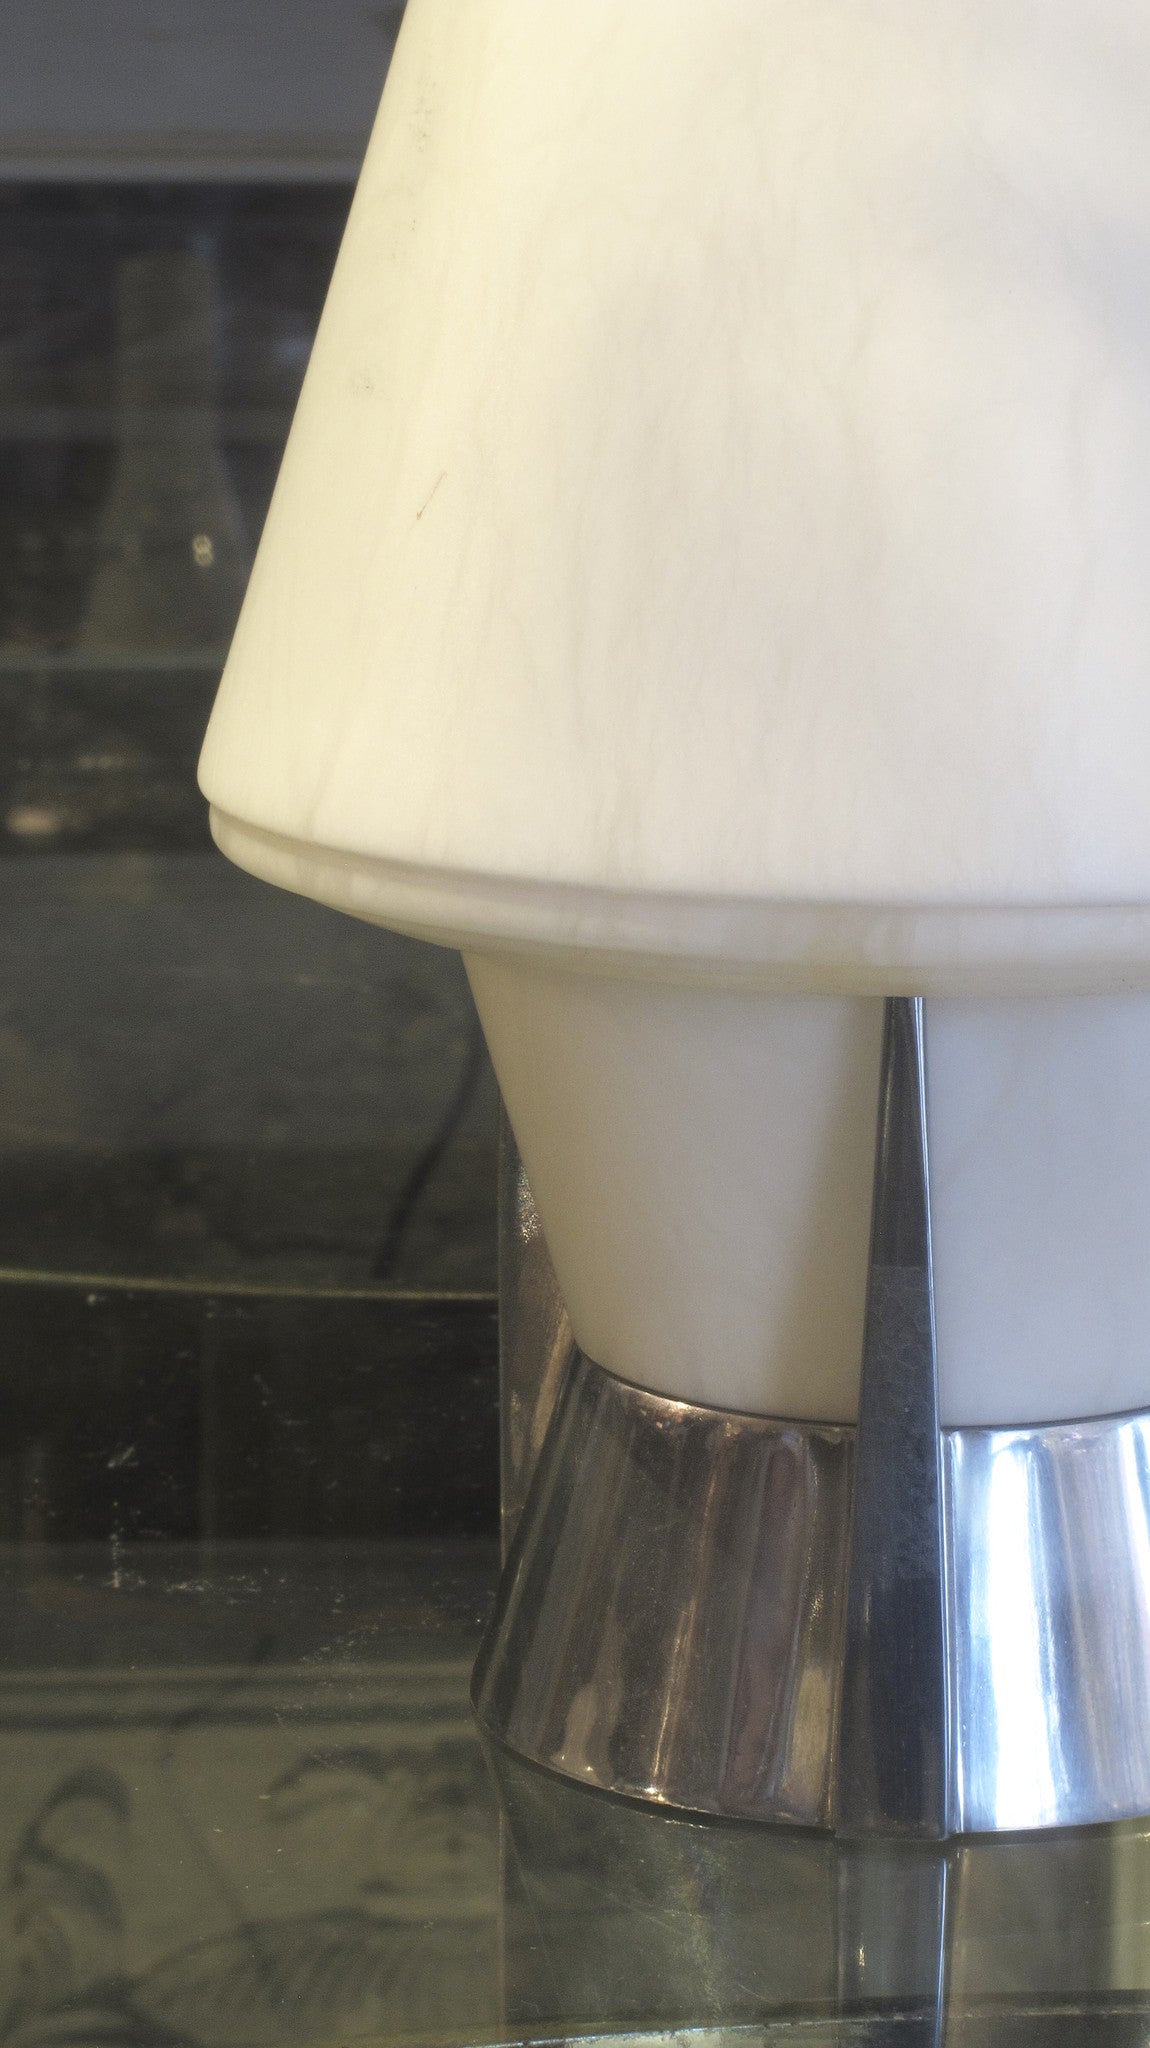 X Very unusual 1980s alabaster lamp . This lamp can be configured in a variety of ways.